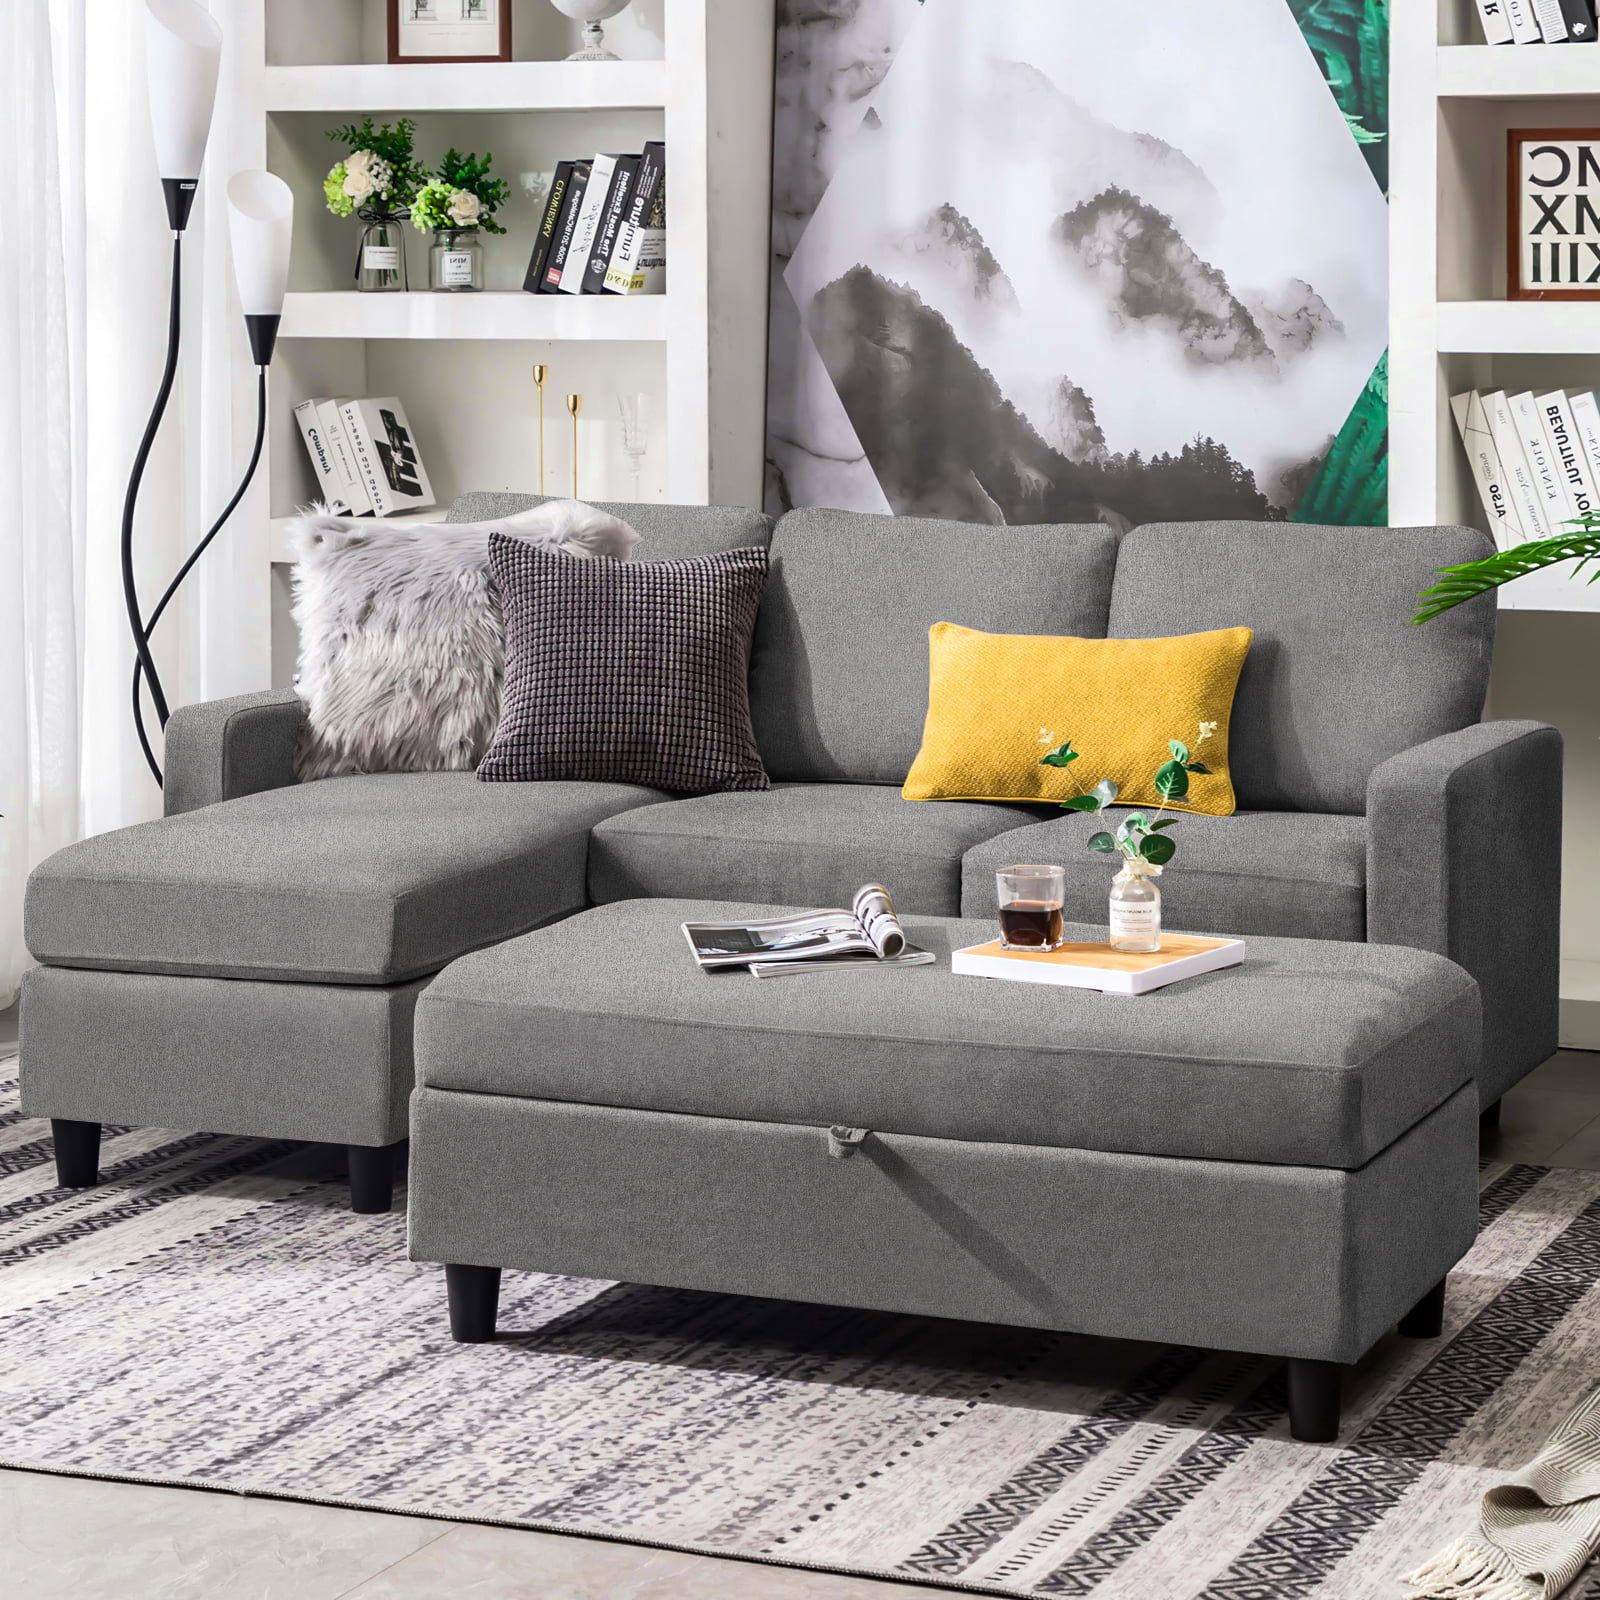 Honbay Convertible Sectional Sofa Set L Shaped Couch With Chaise & Ottoman  For Small Spaces, Grey Polyester – Walmart Pertaining To Small L Shaped Sectionals (View 7 of 20)